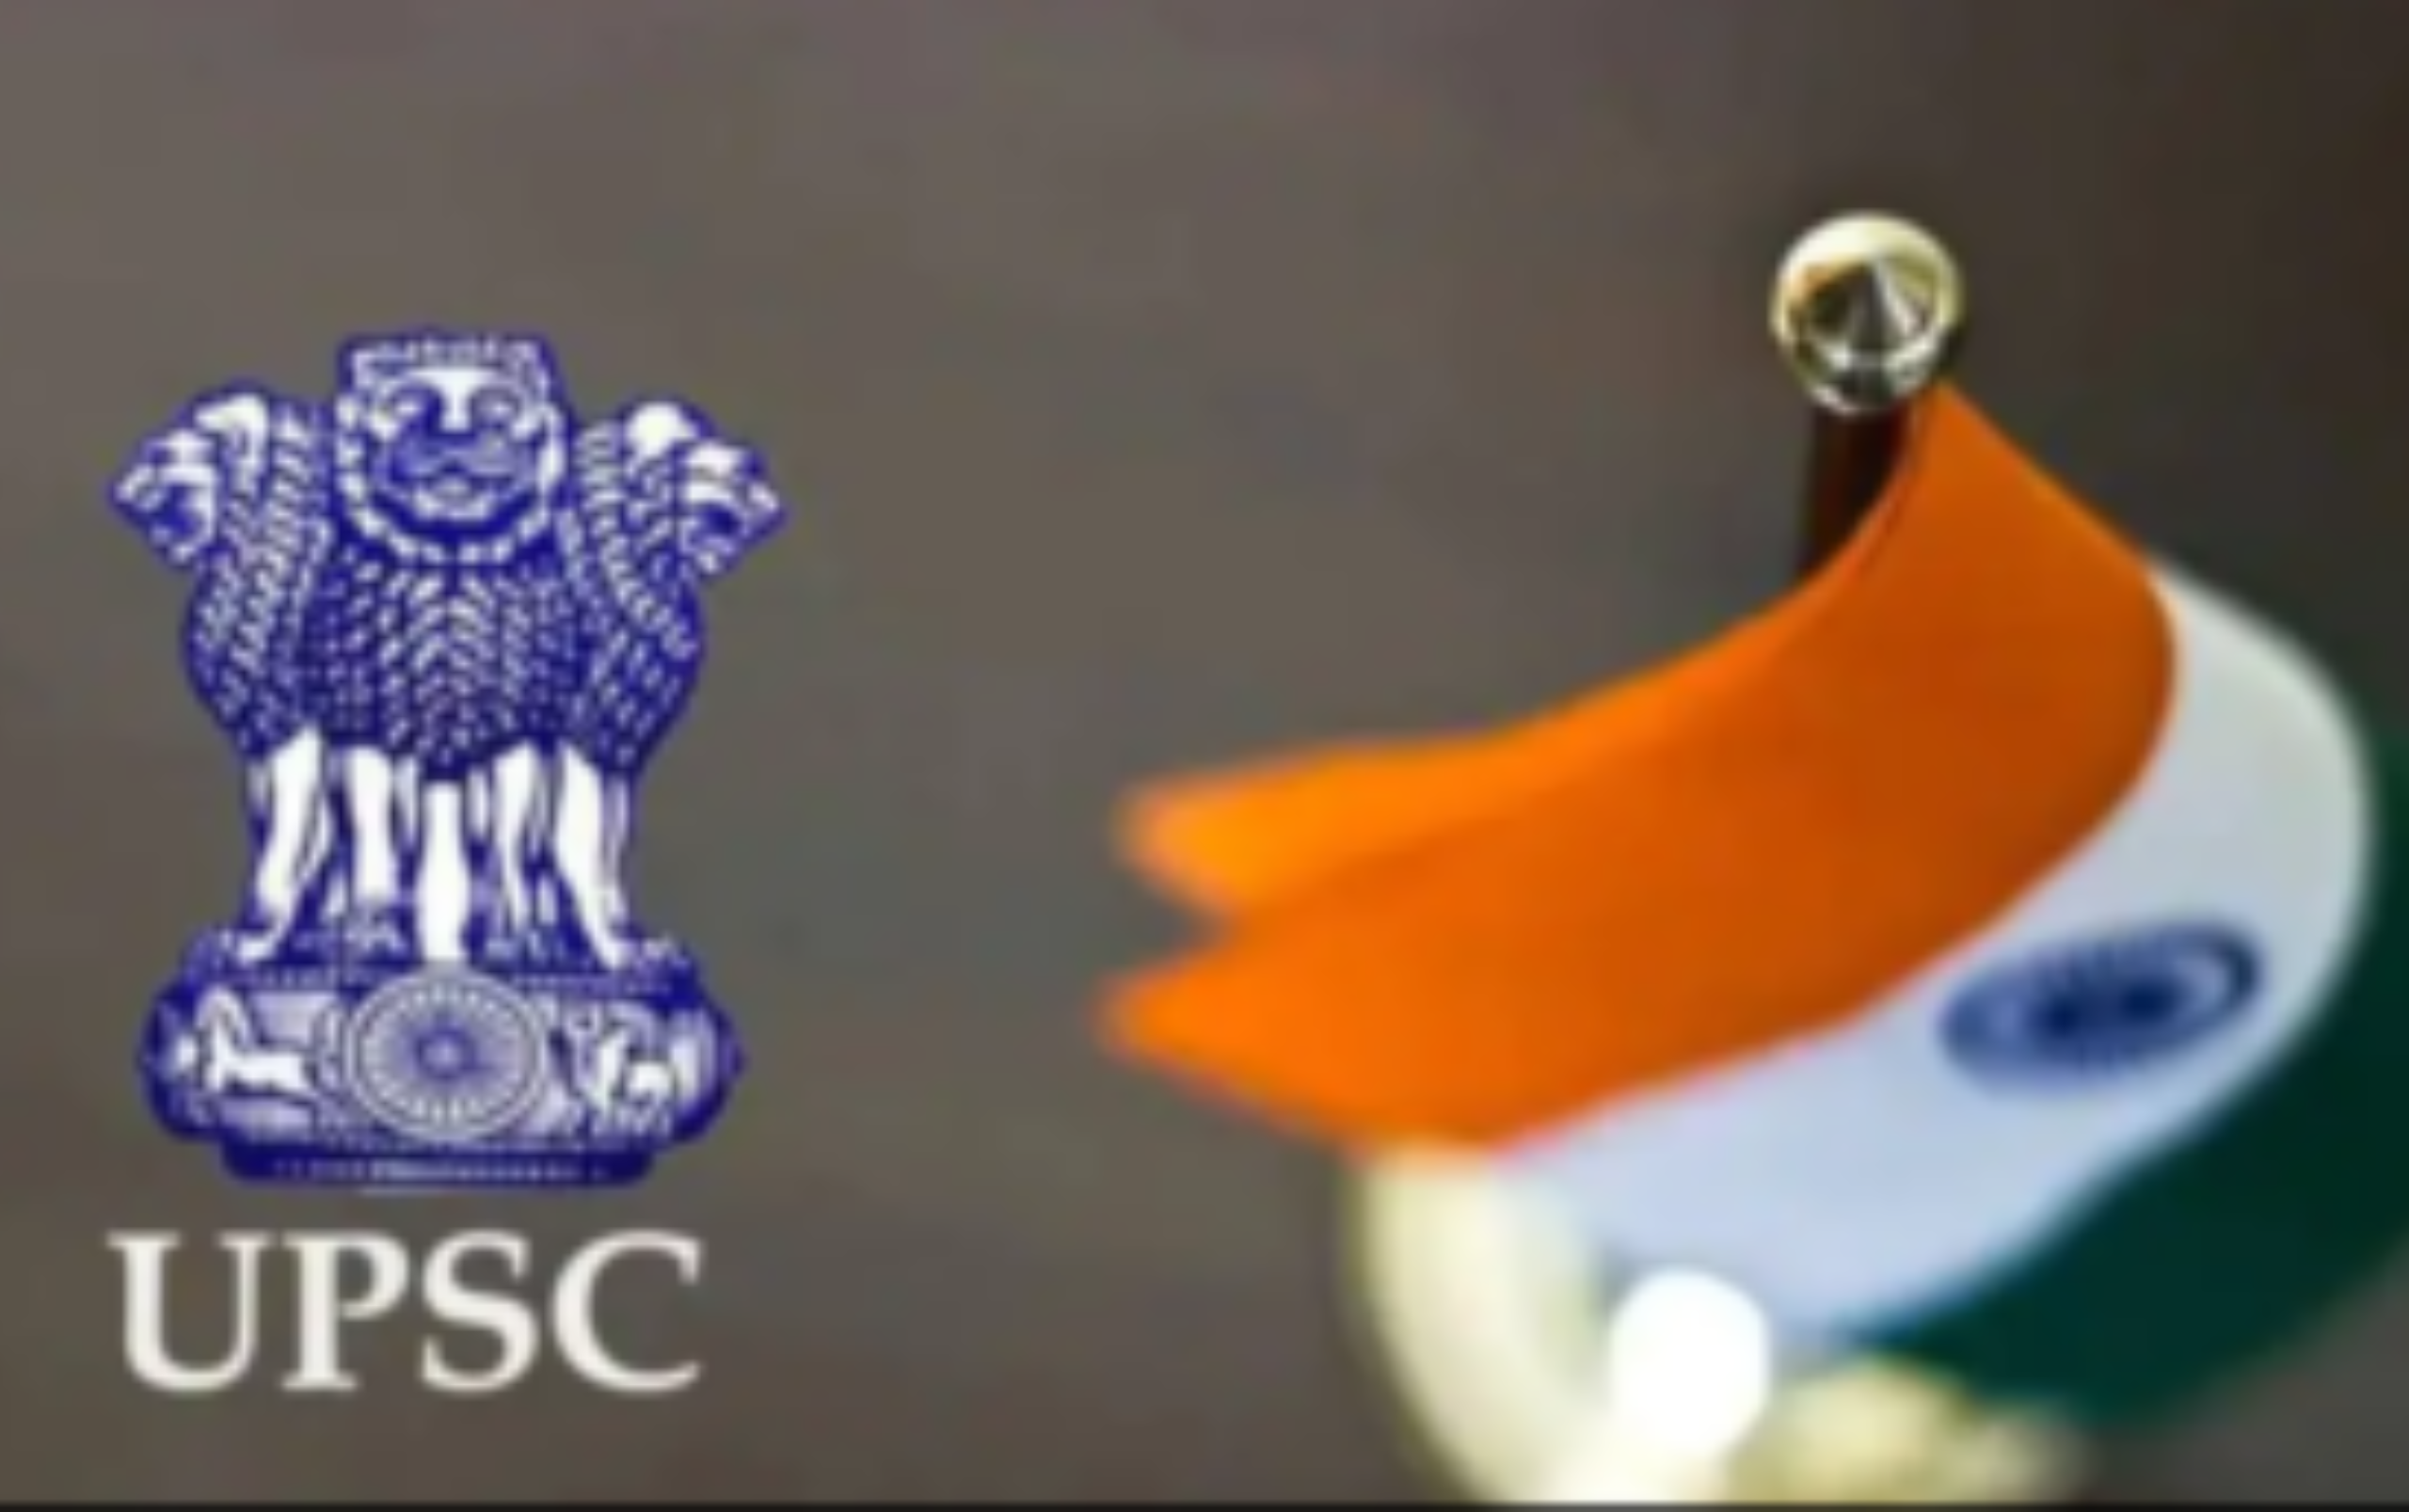 UPSC Background and history